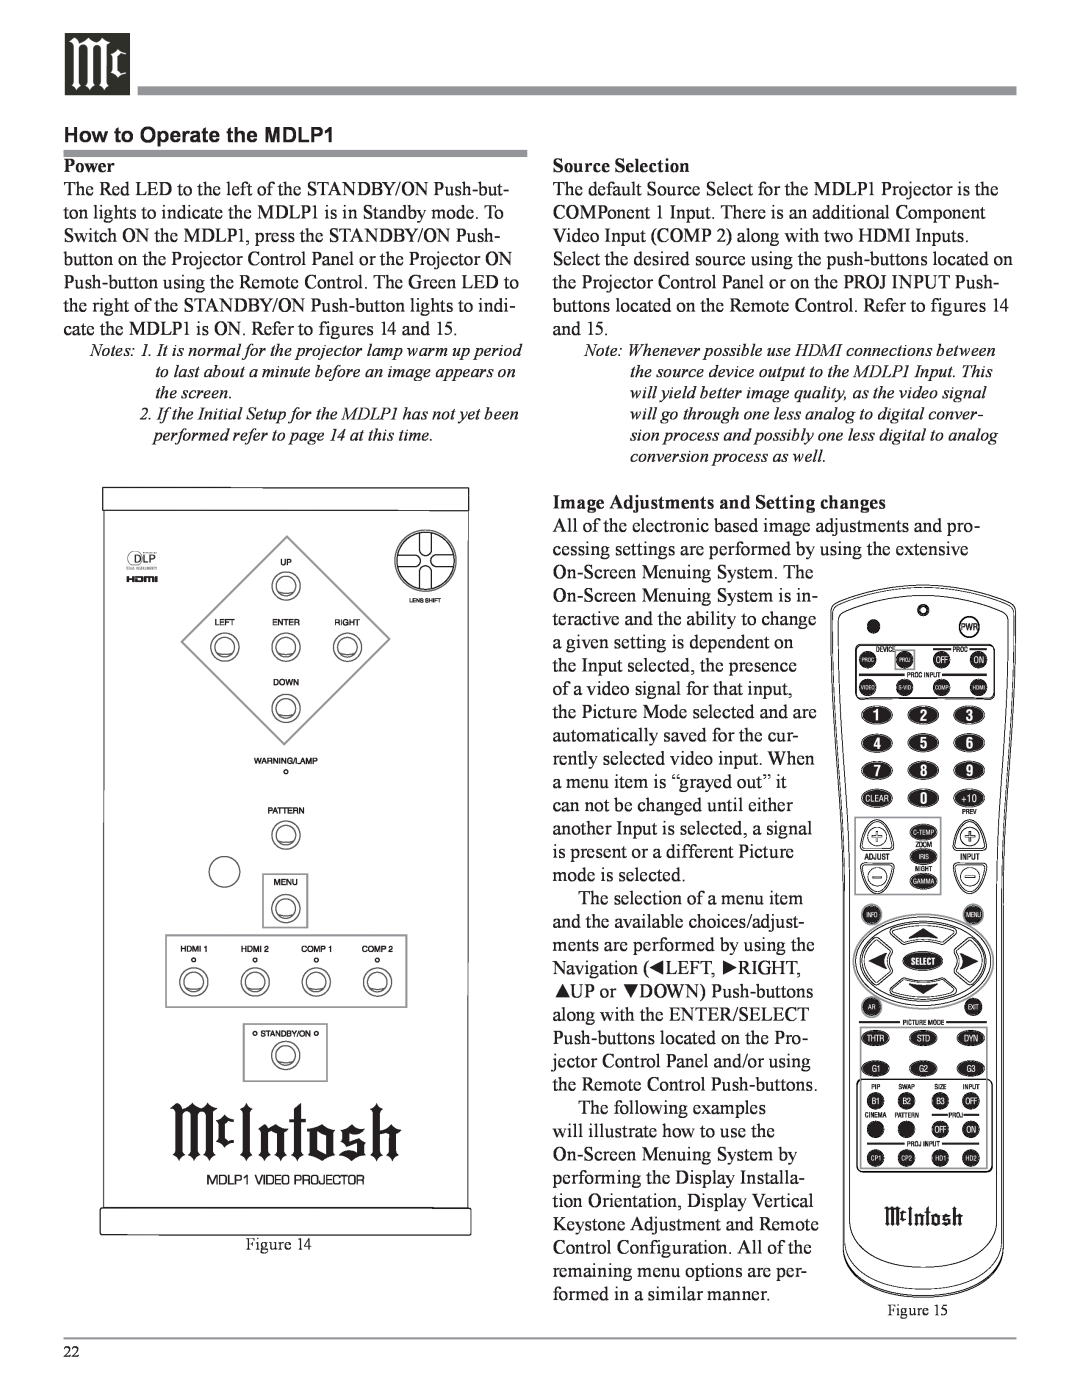 McIntosh owner manual How to Operate the MDLP1, Power, Source Selection, Image Adjustments and Setting changes 